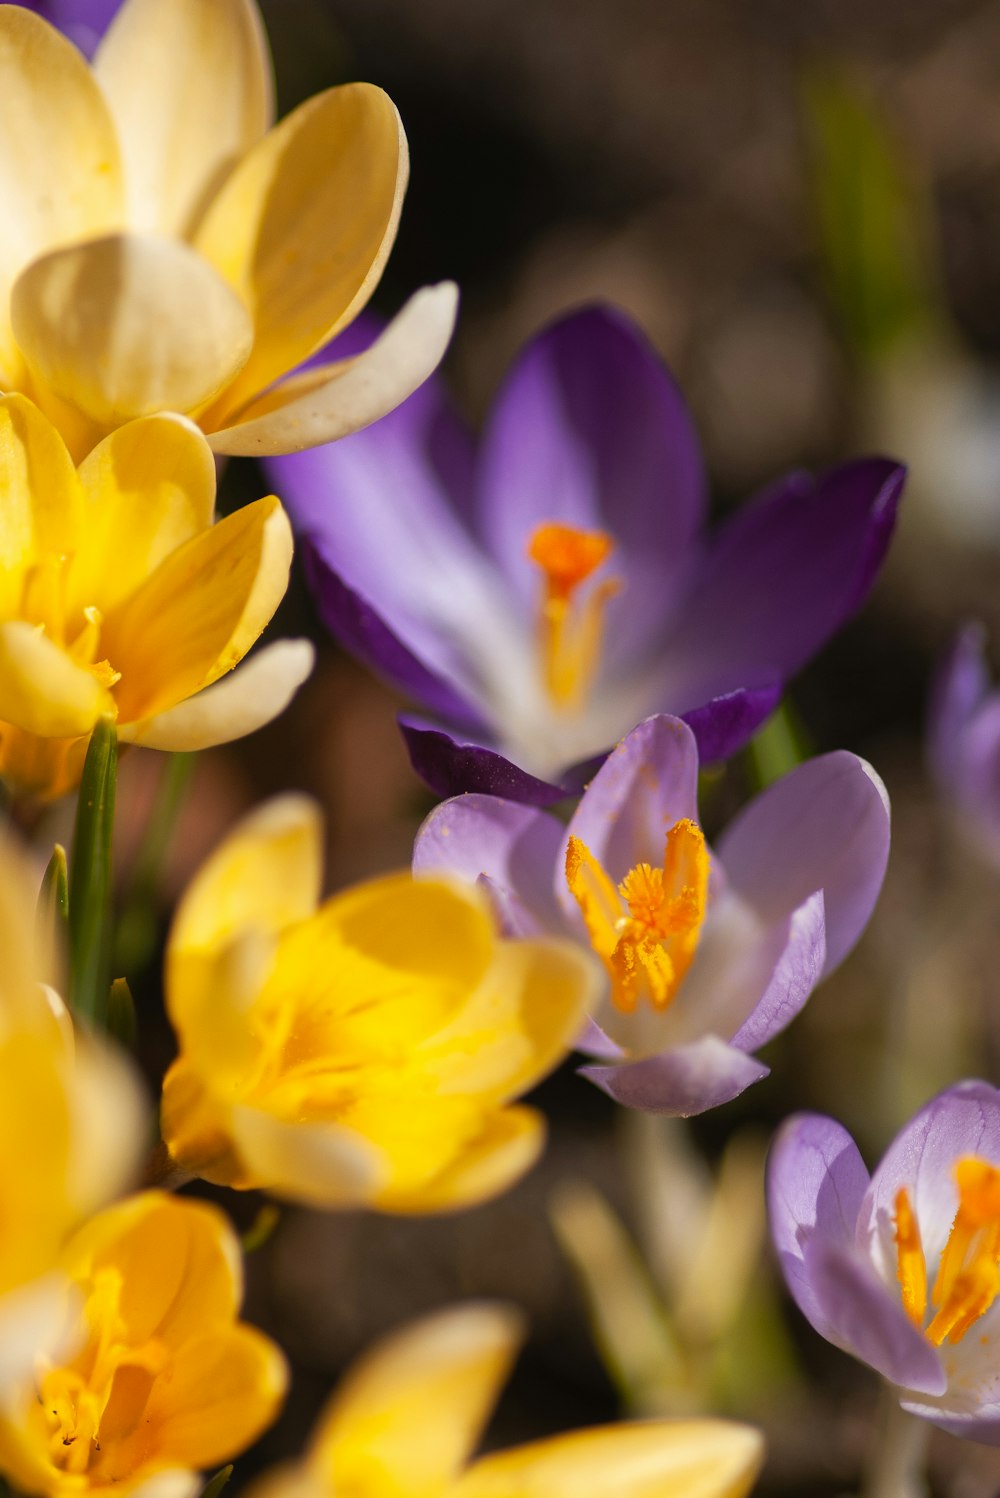 purple and yellow crocus flowers in bloom during daytime